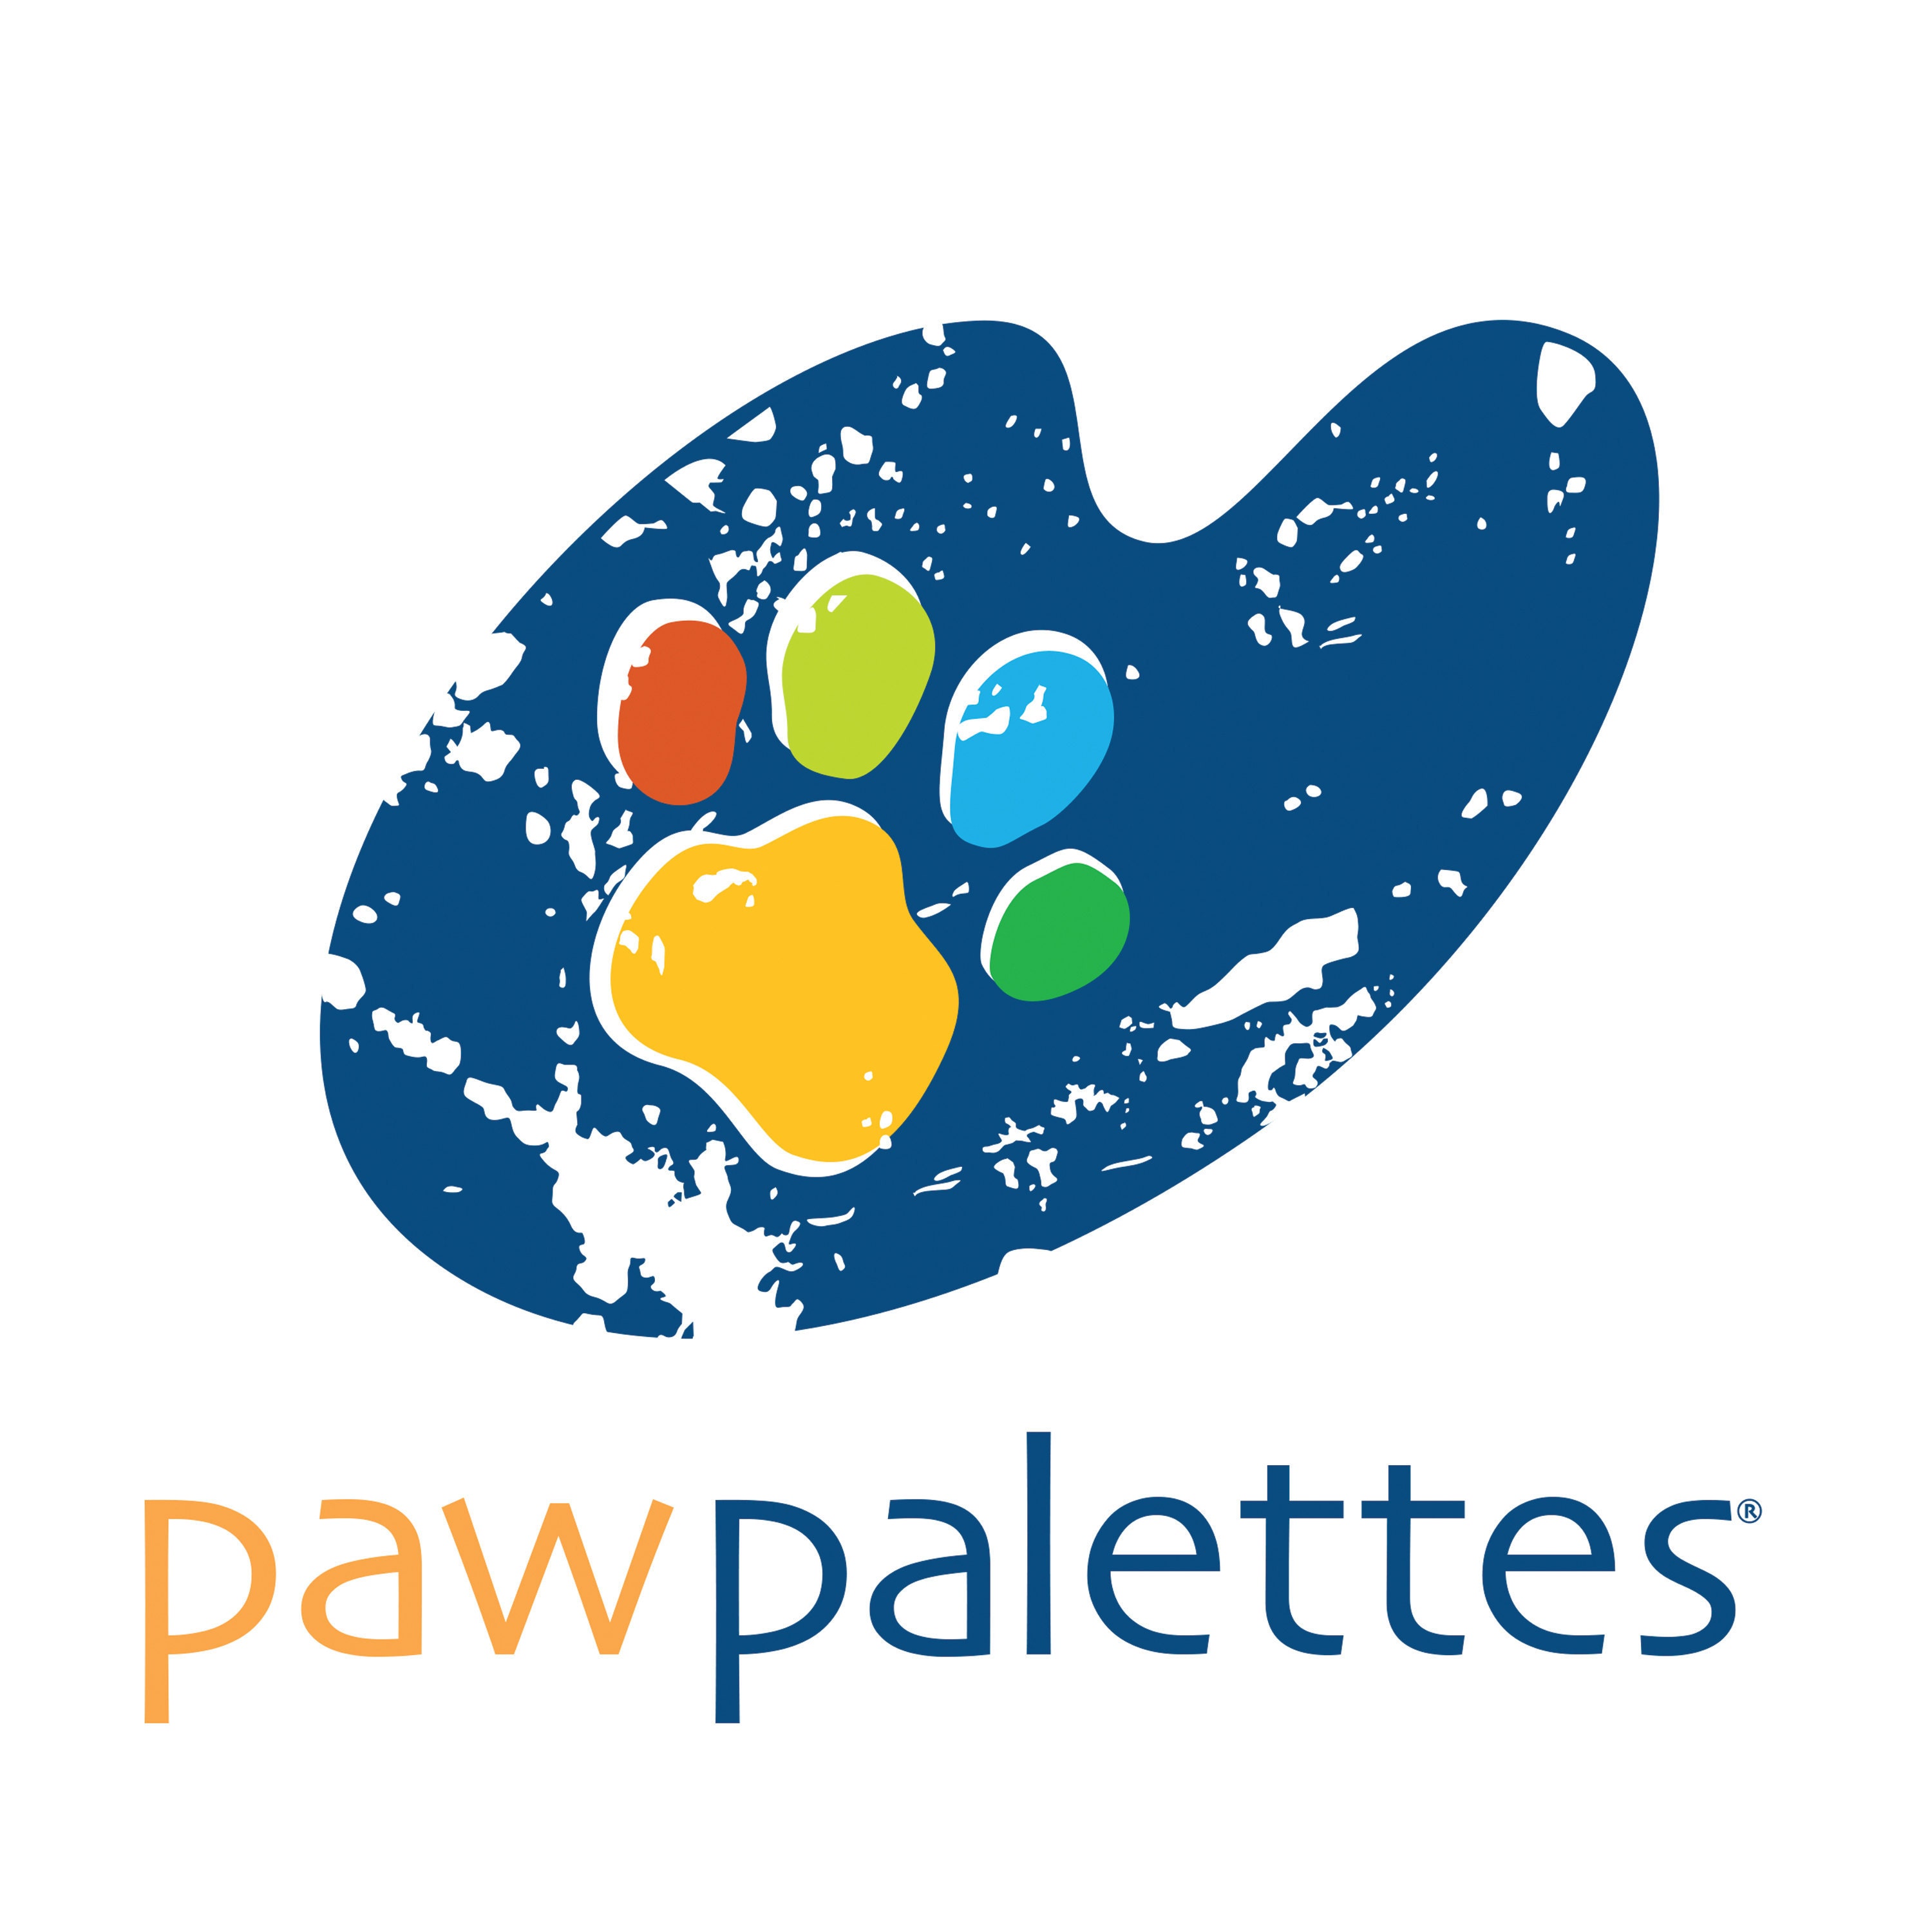 PawPalettes Etsy